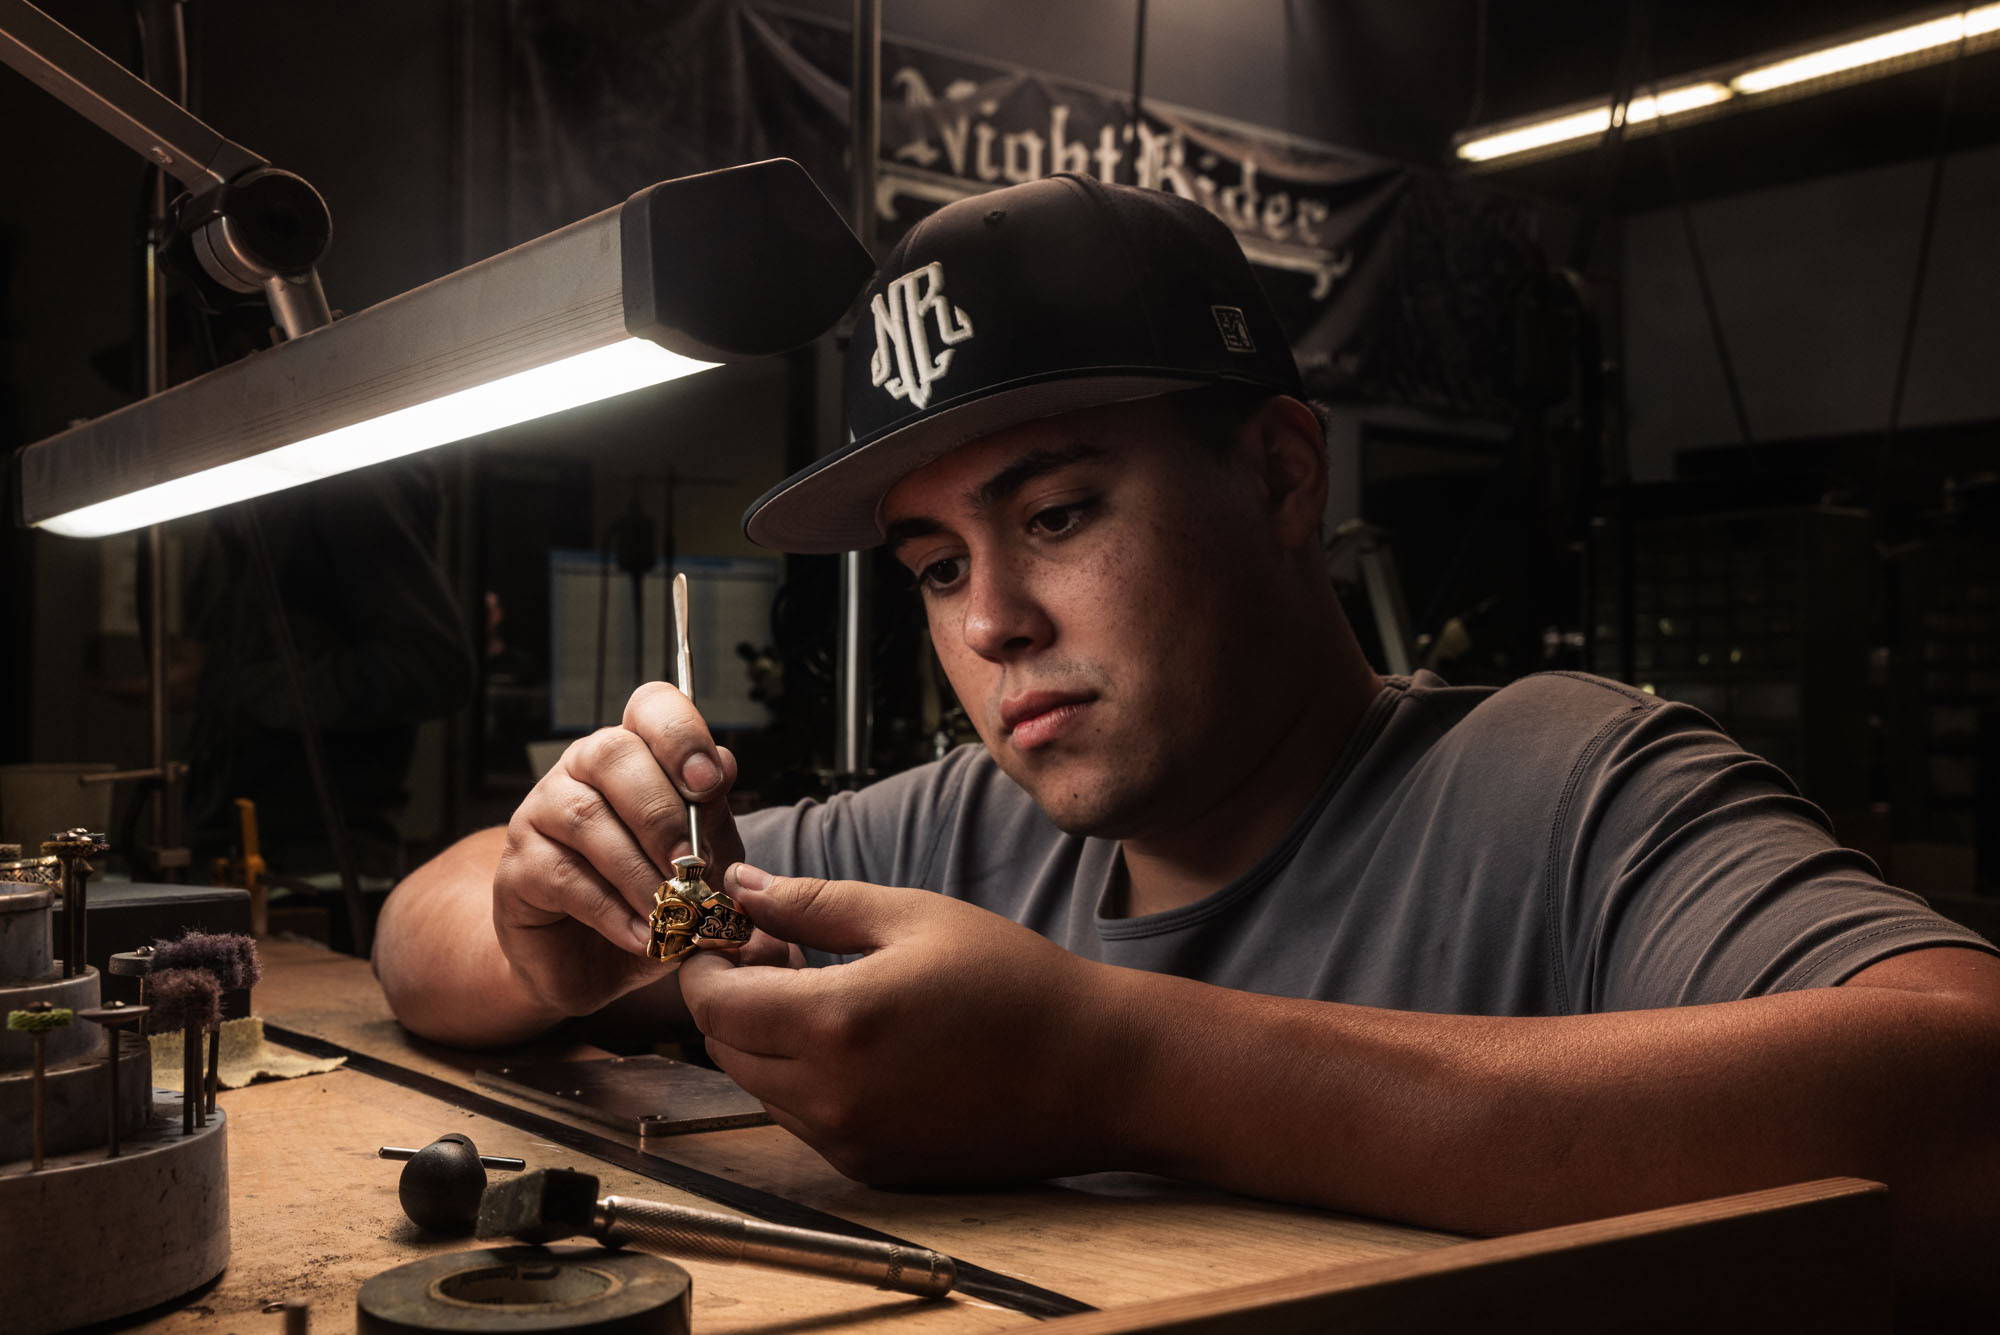 A jeweler handcrafts a NightRider Luxe ring